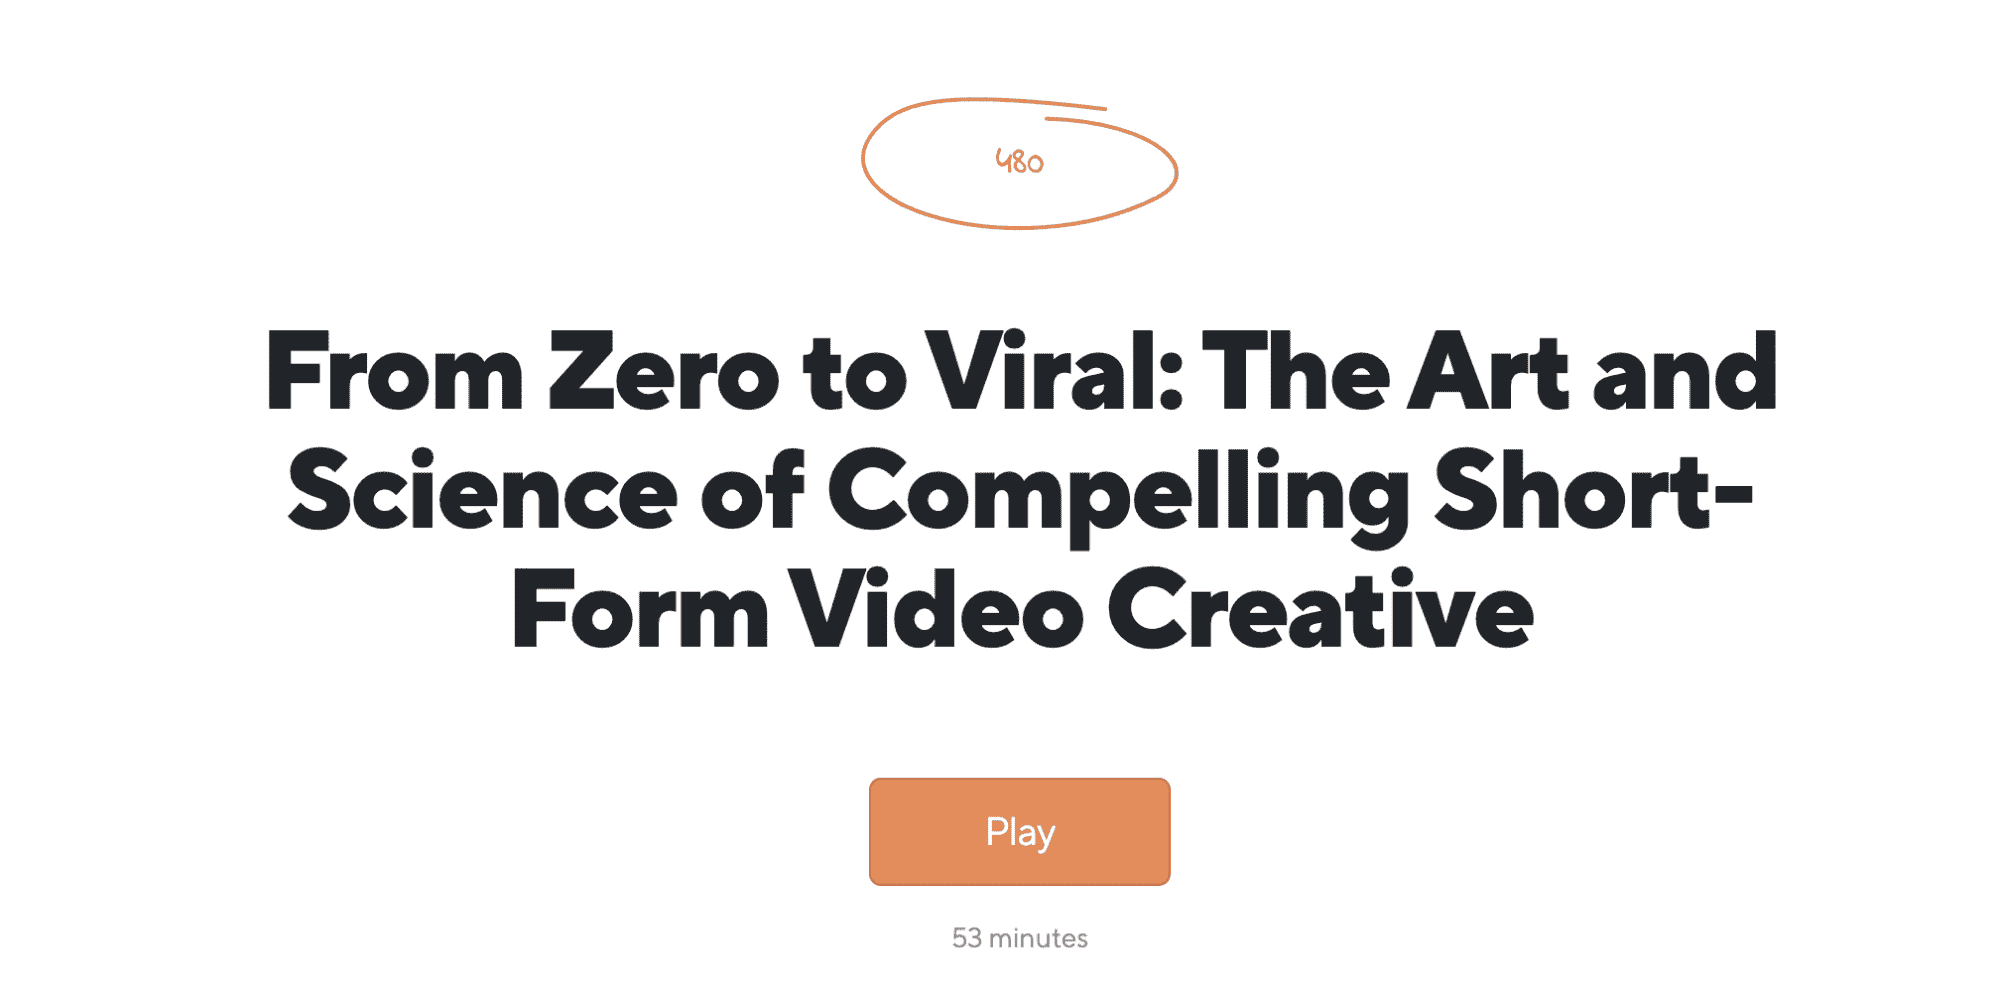 From Zero to Viral: The Art and Science of Compelling Short-Form Video Creative